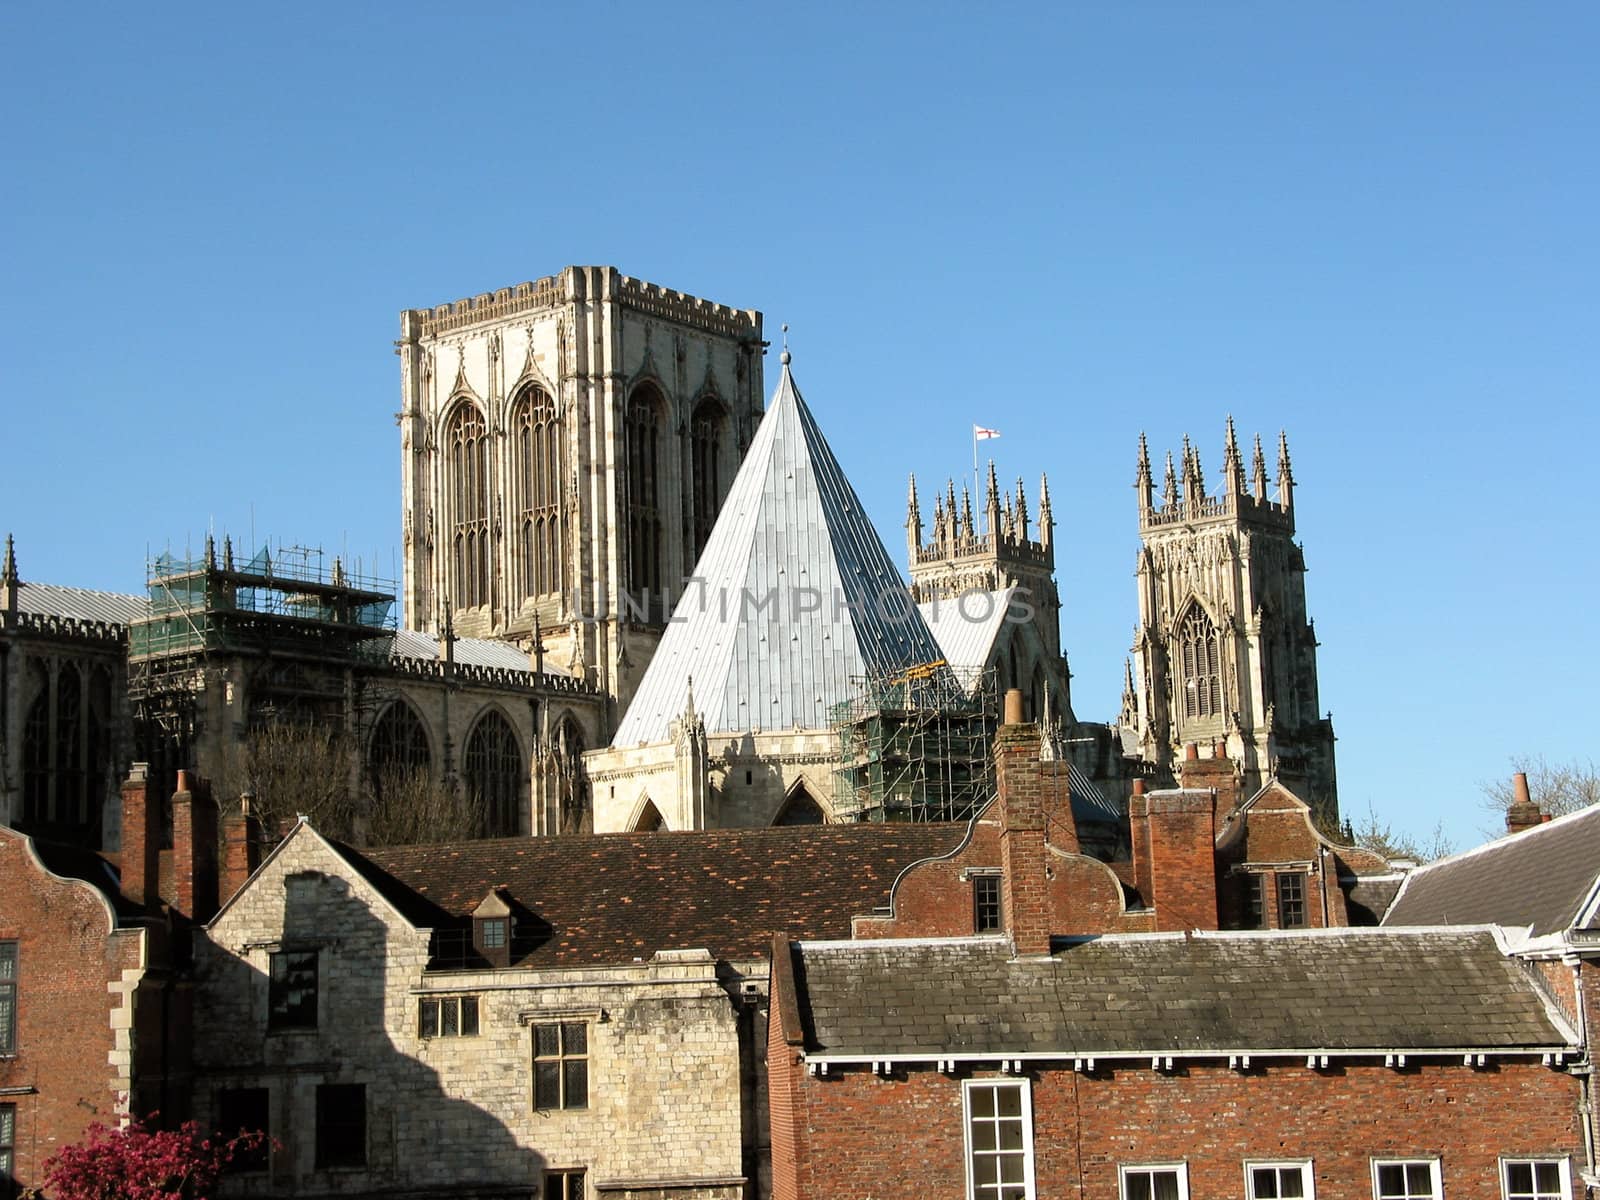 The cathedral of York seen from the city walls by mizio1970